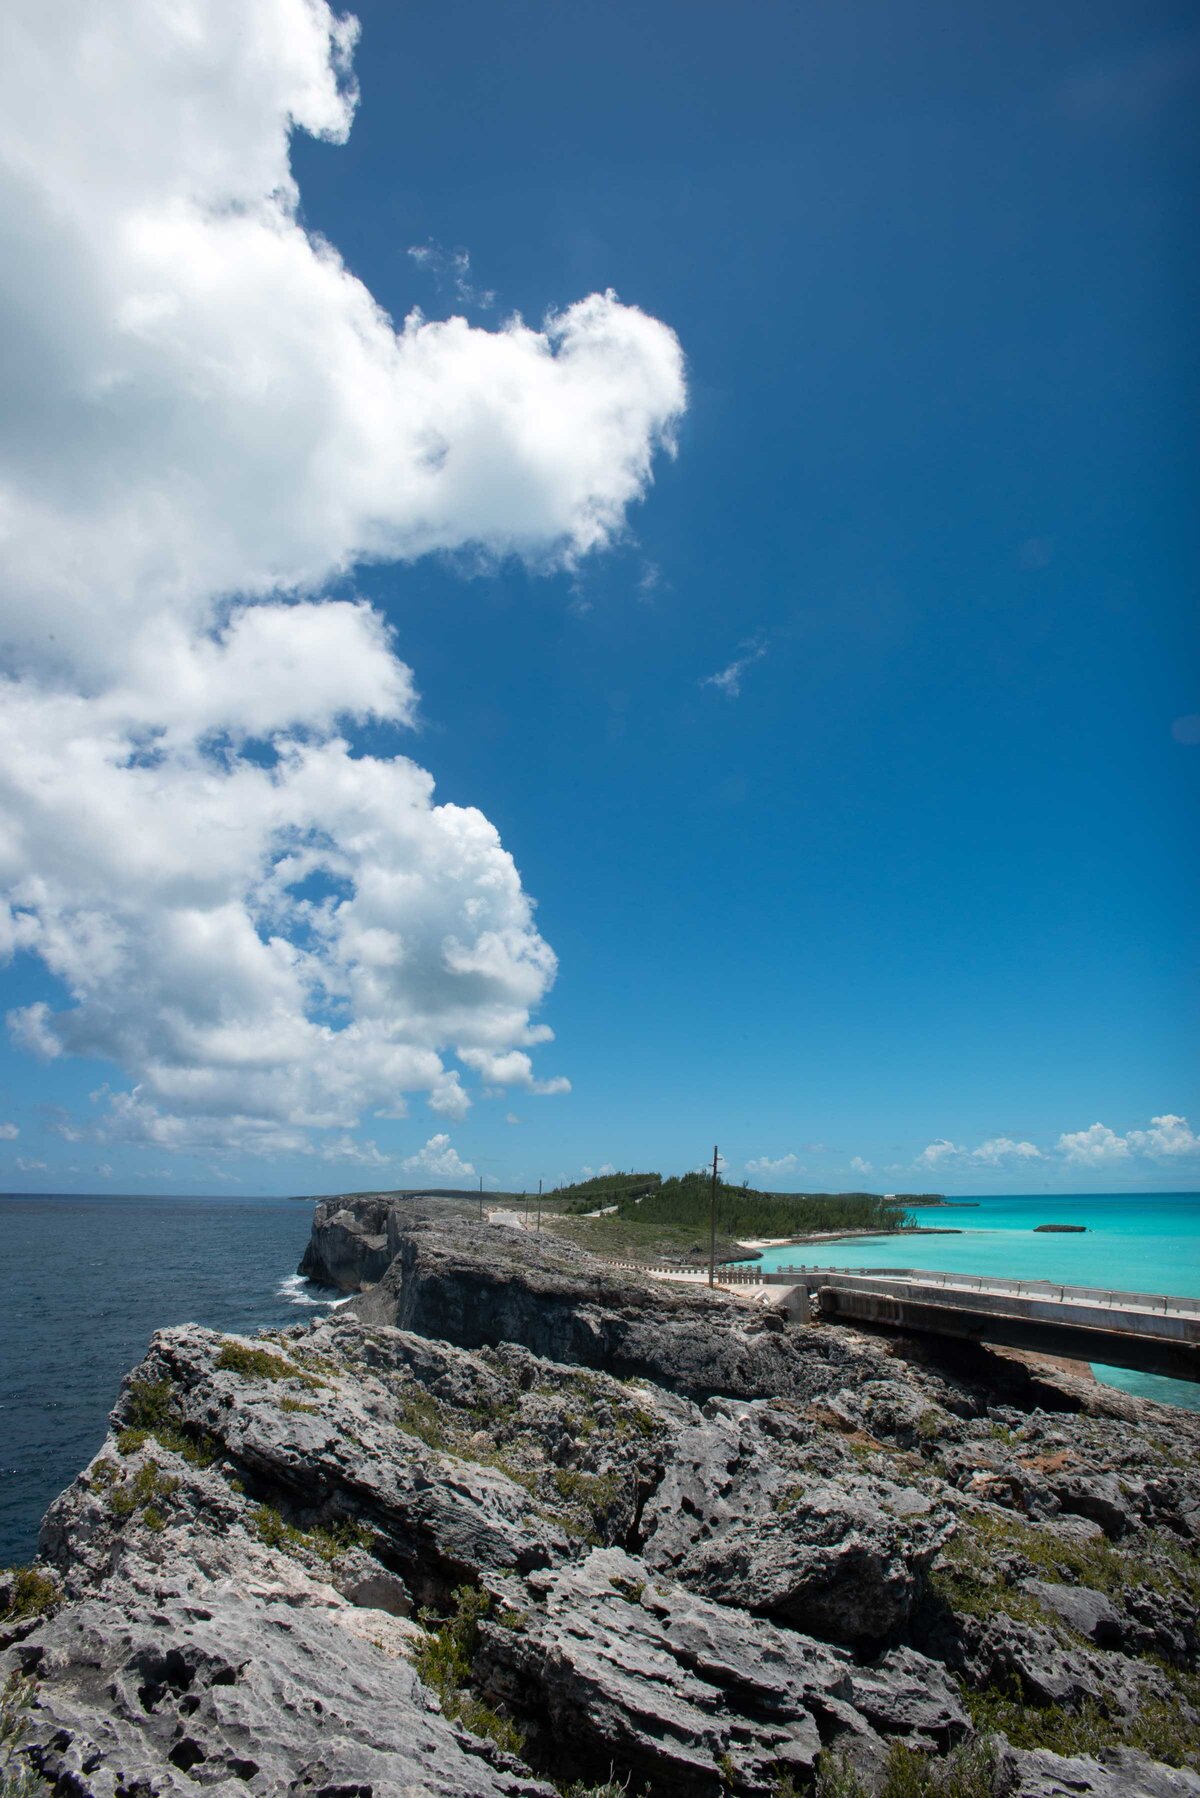 Volcanic rock juts out to separate two bodies of water on Eleuthera Bahamas